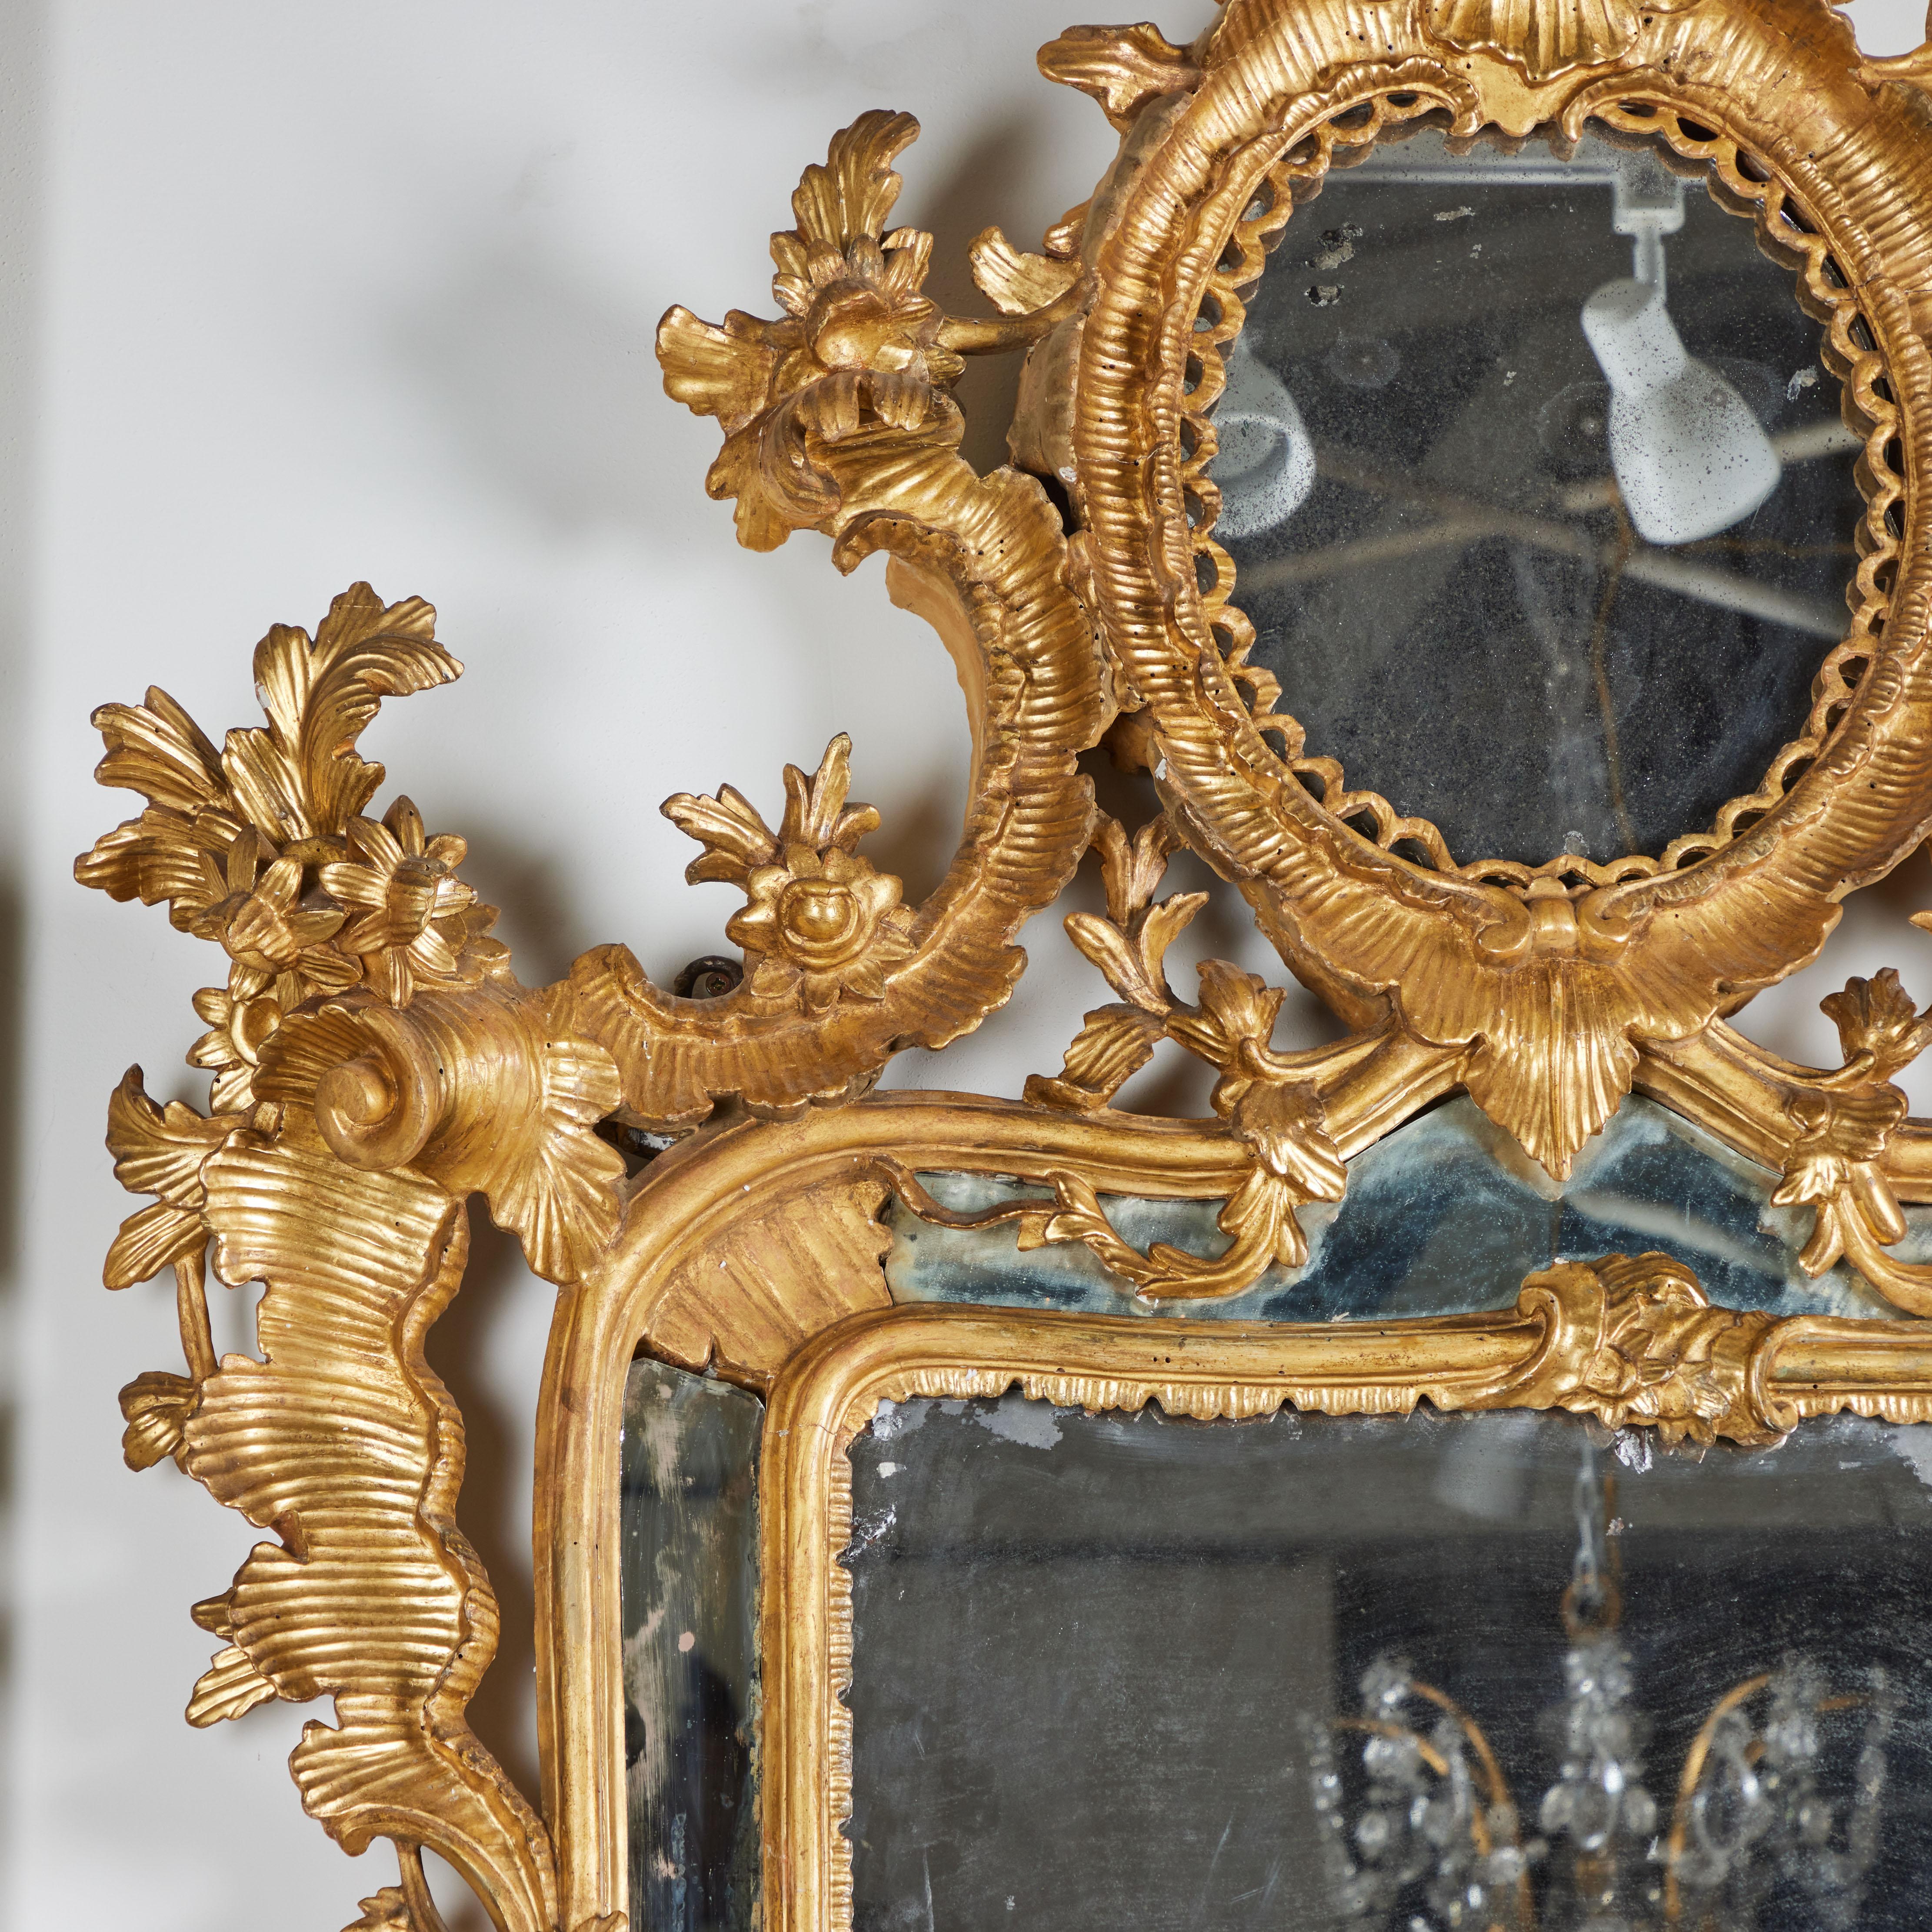 A hand carved, gessoed and gilded framed mirror with floral and vine designs.  Original glass with age-appropriate spotting and loss of silvering to plates.  